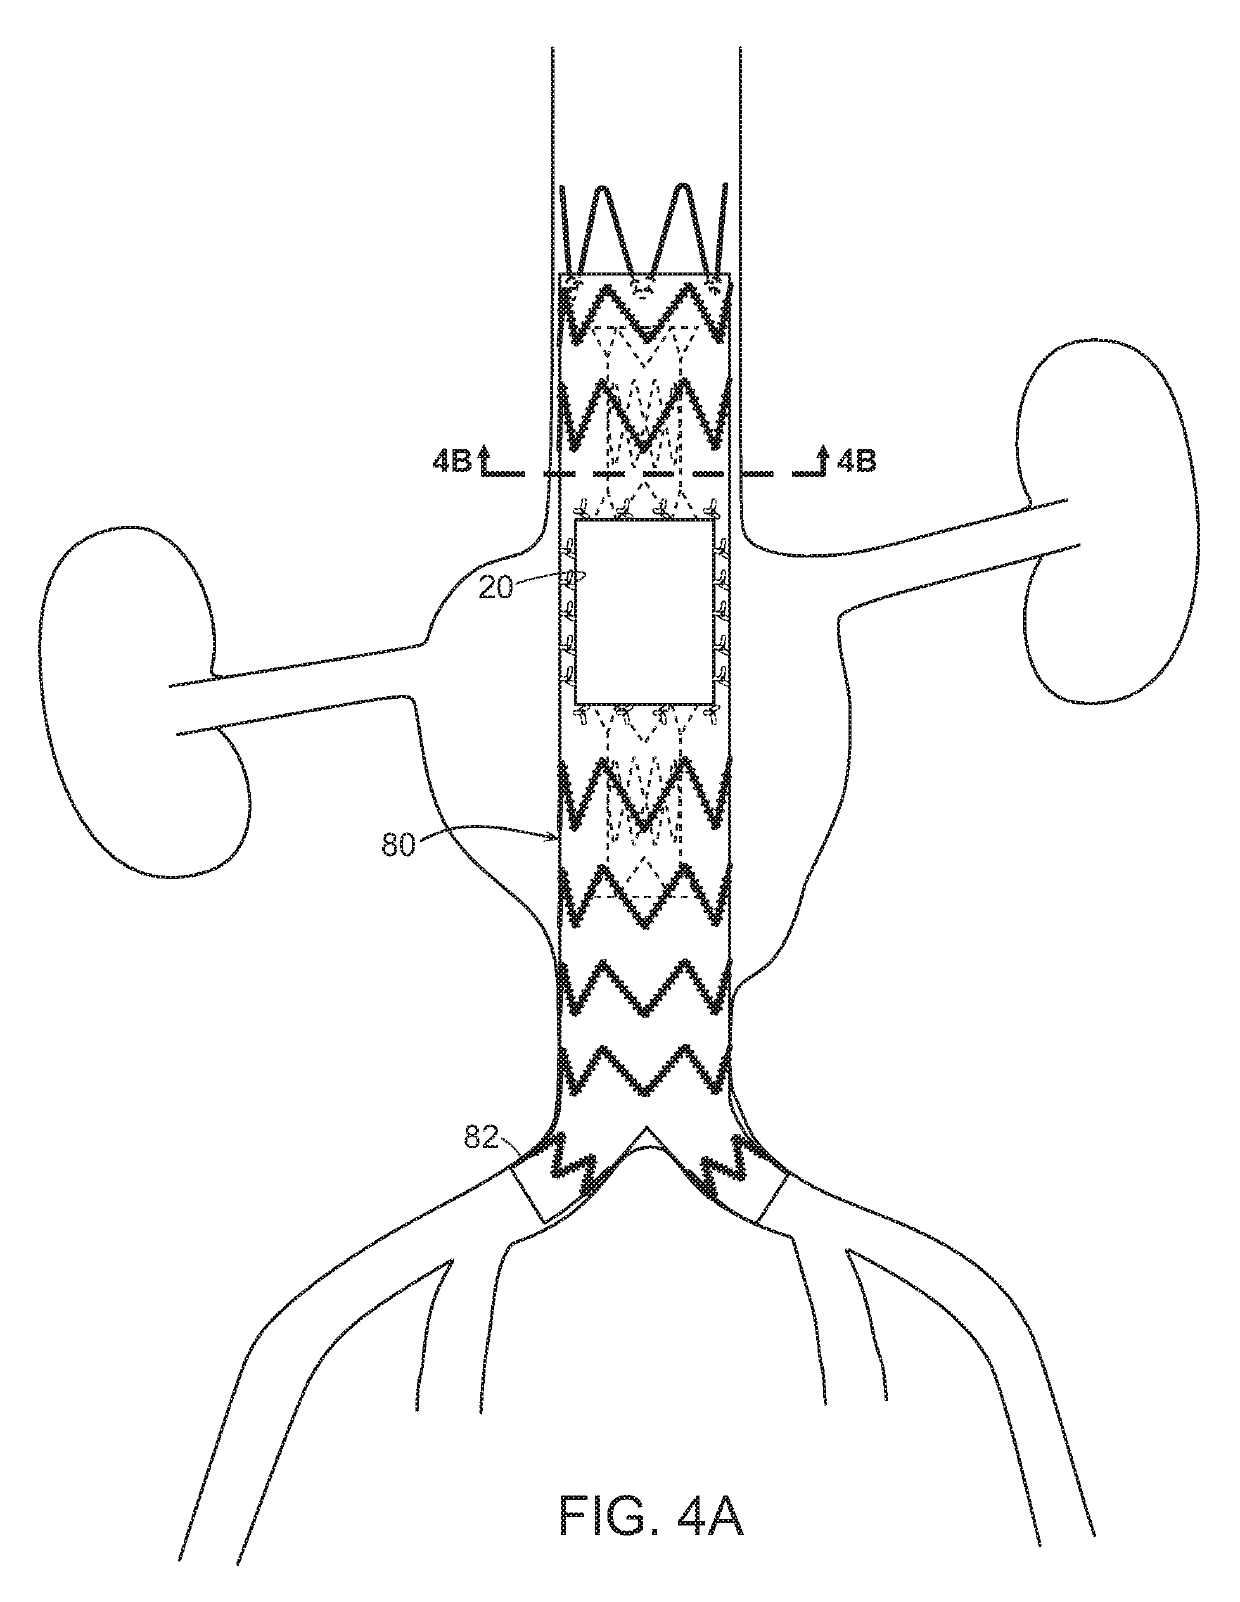 Stent Grafts And Methods Of Use For Treating Aneurysms